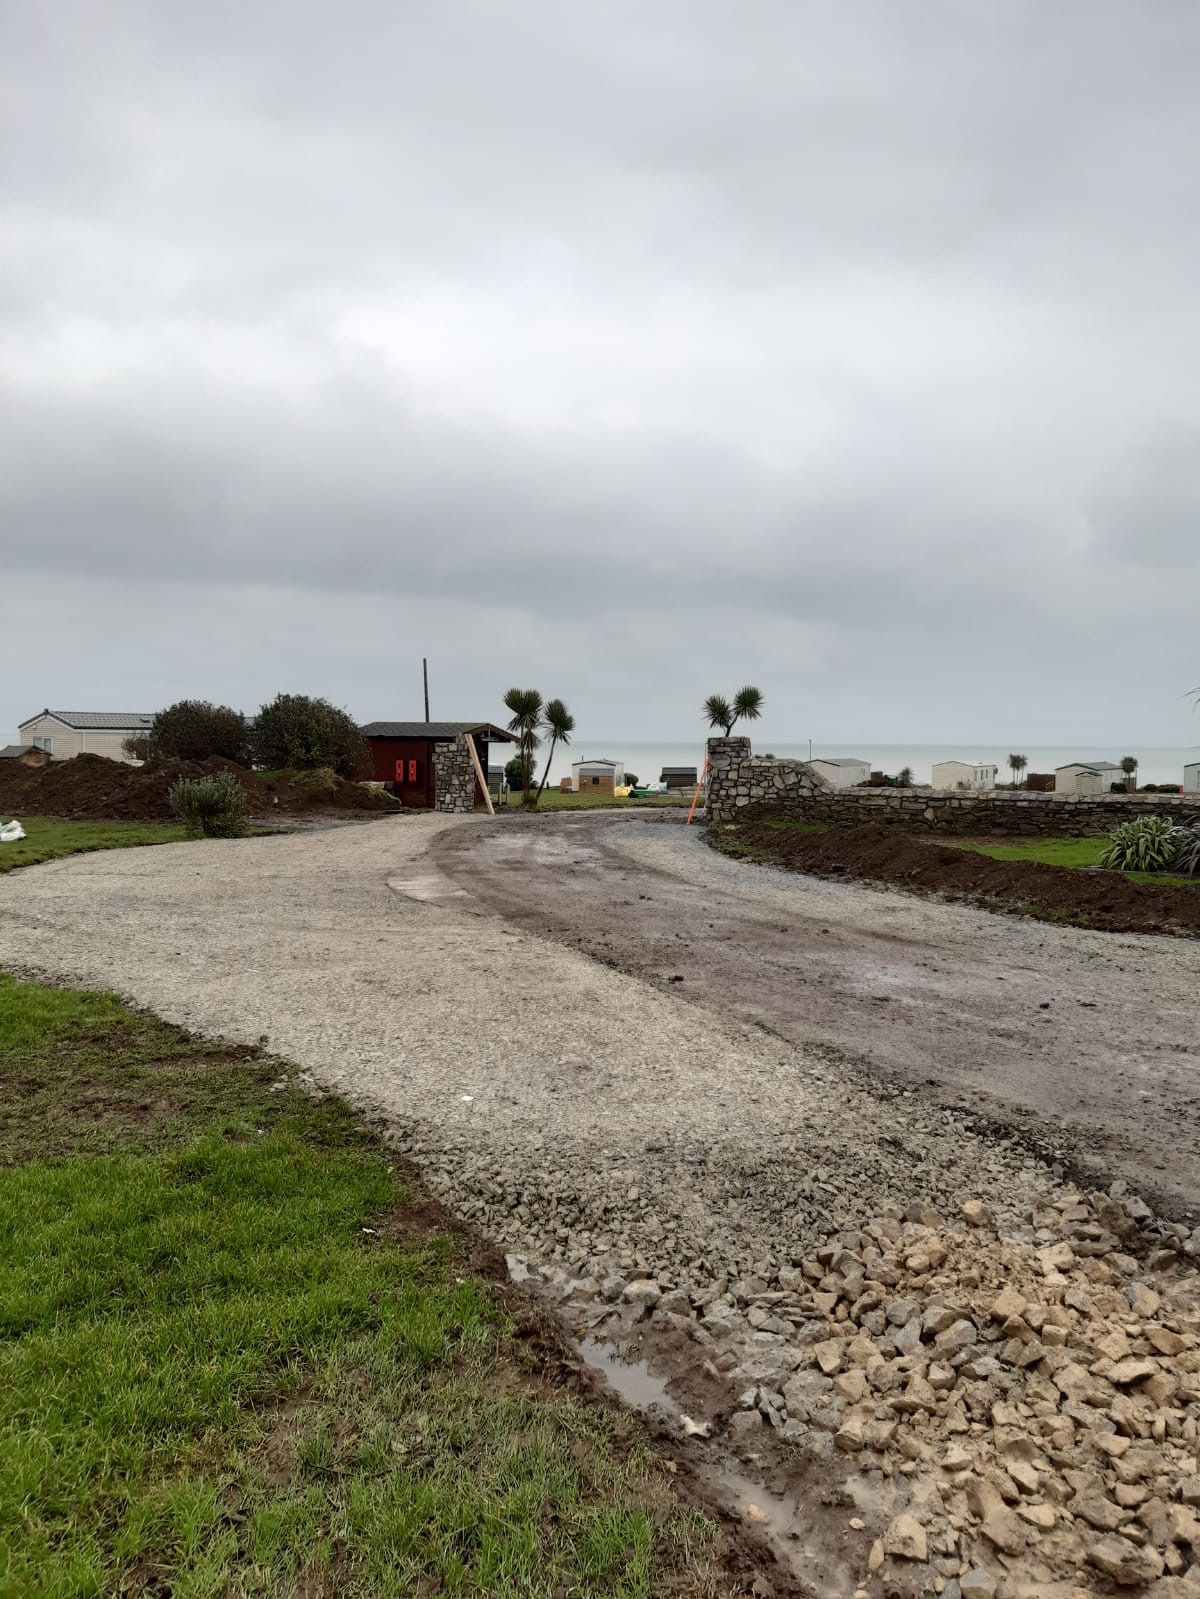 Lynders Mobile Home Park, New Entrance 2021 - Portrane, Donabate, North County Dublin